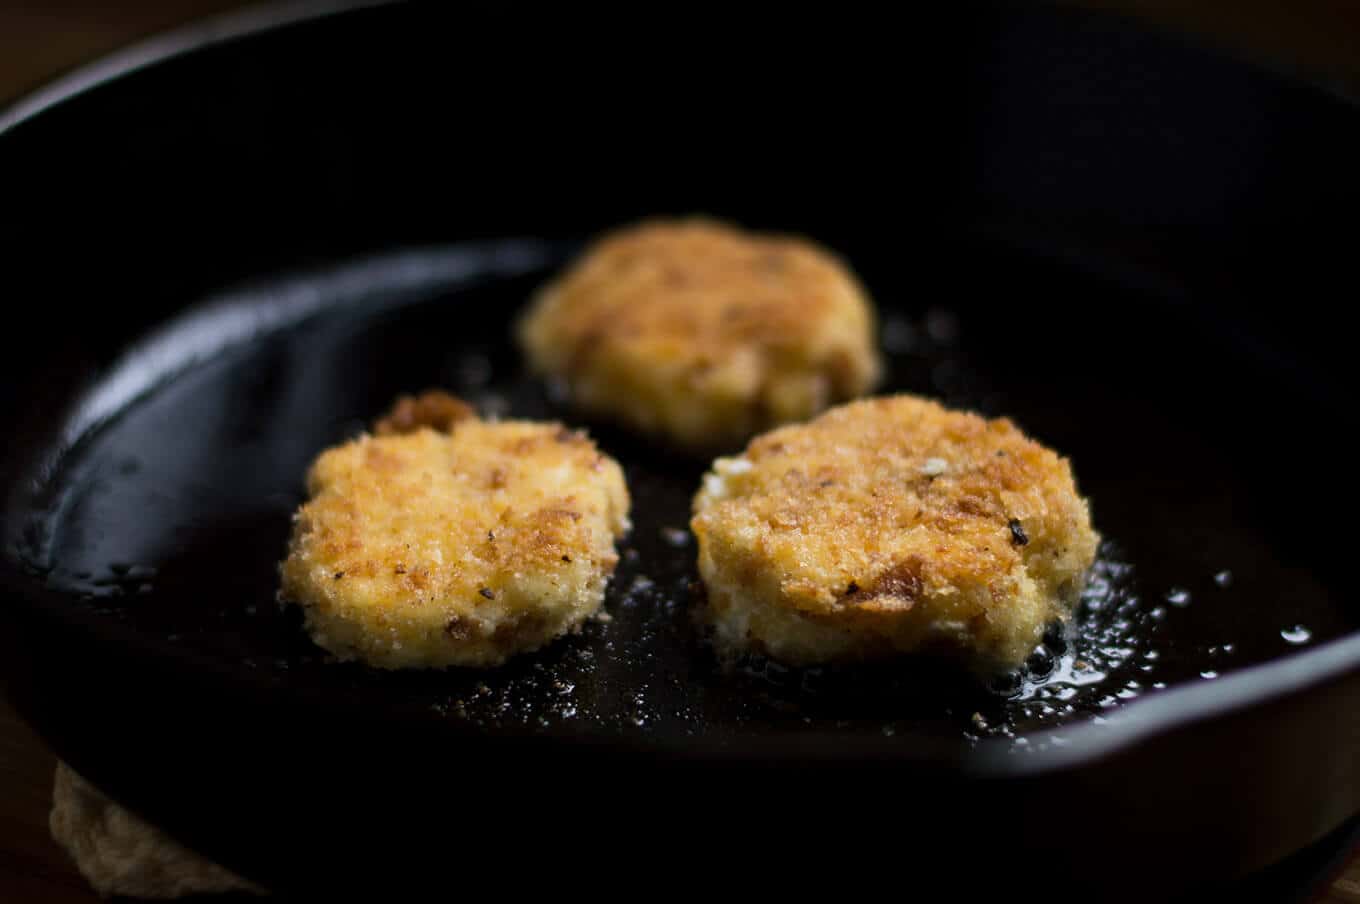 A close up of breaded goat cheese being fried in a pan.